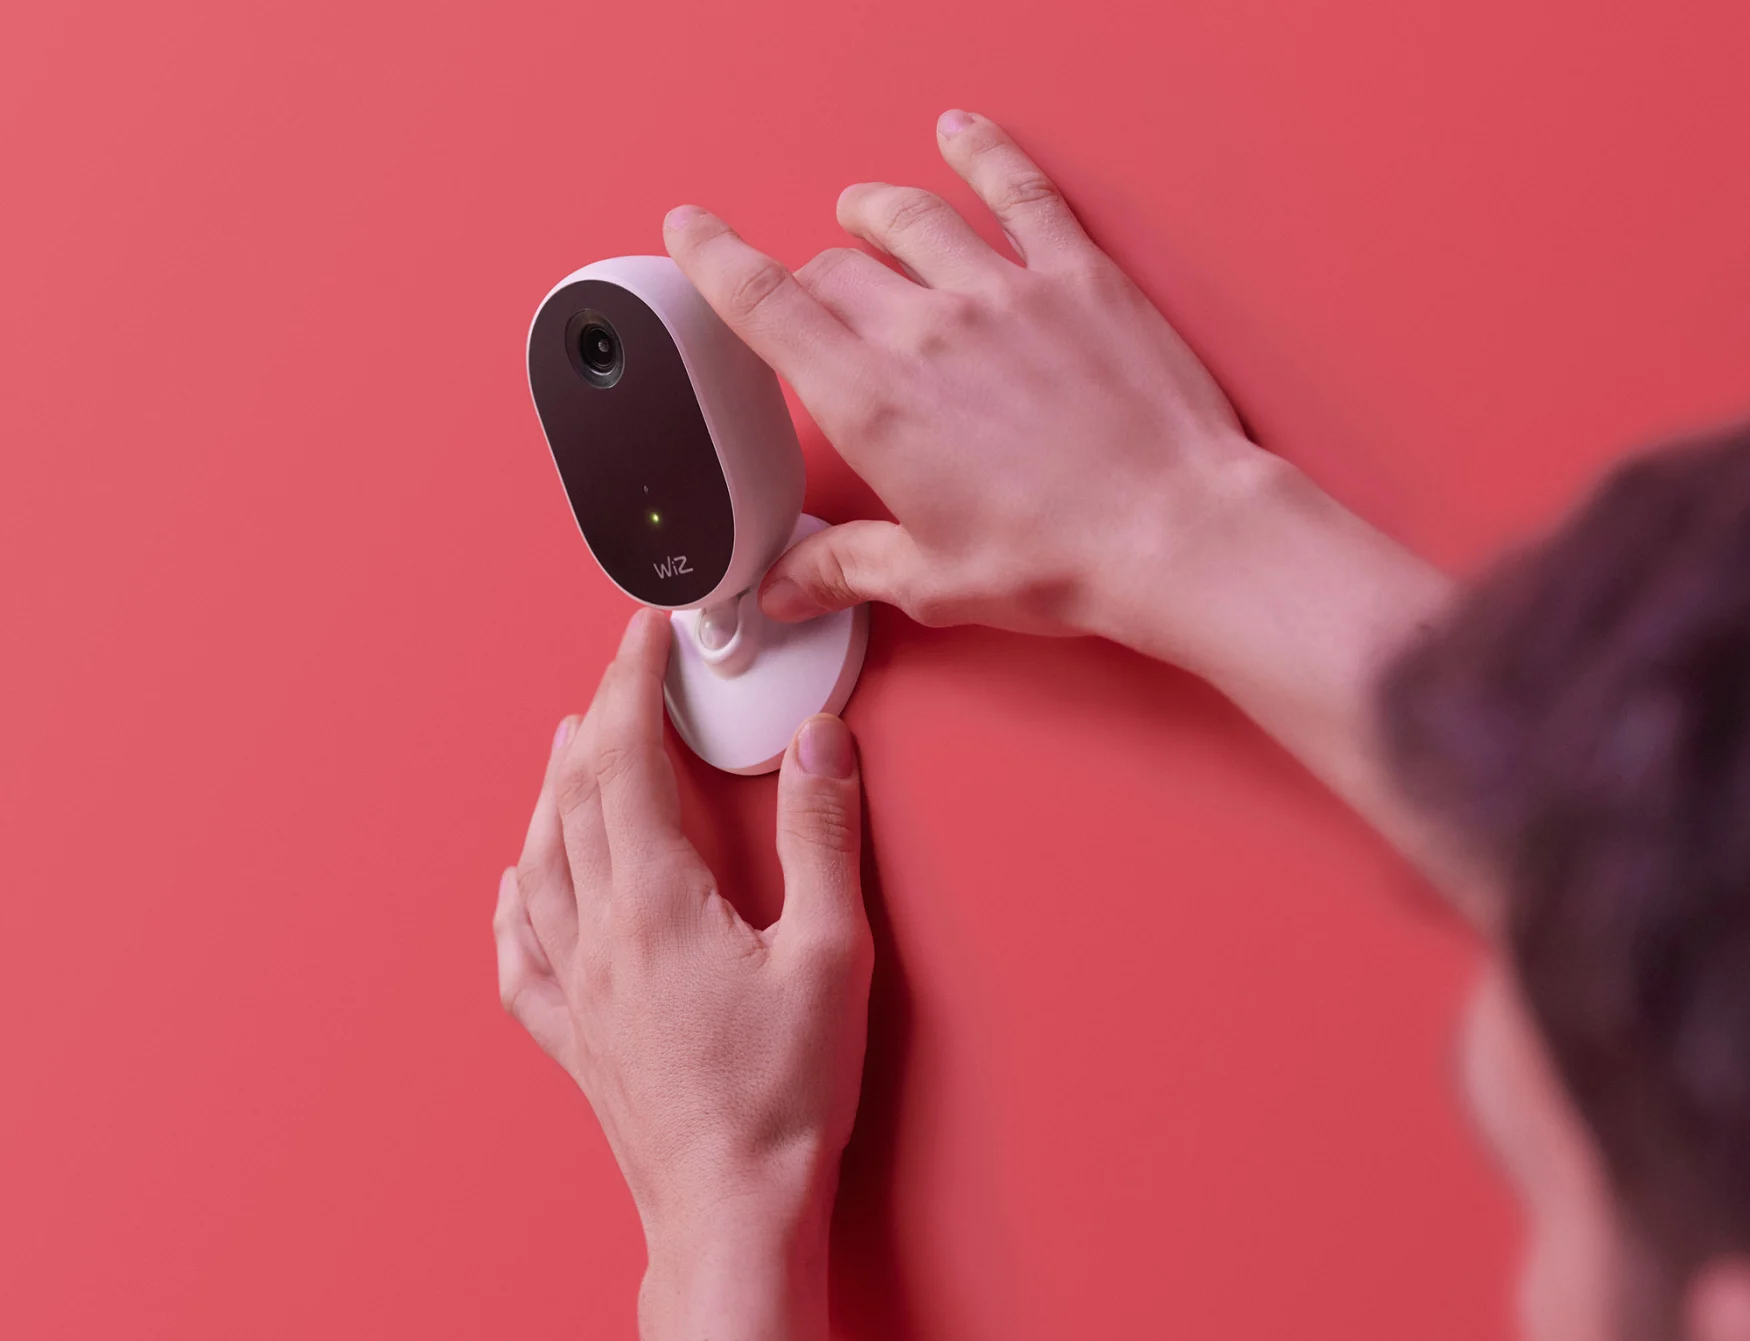 Wiz's motion-sensing smartlights can now monitor your home